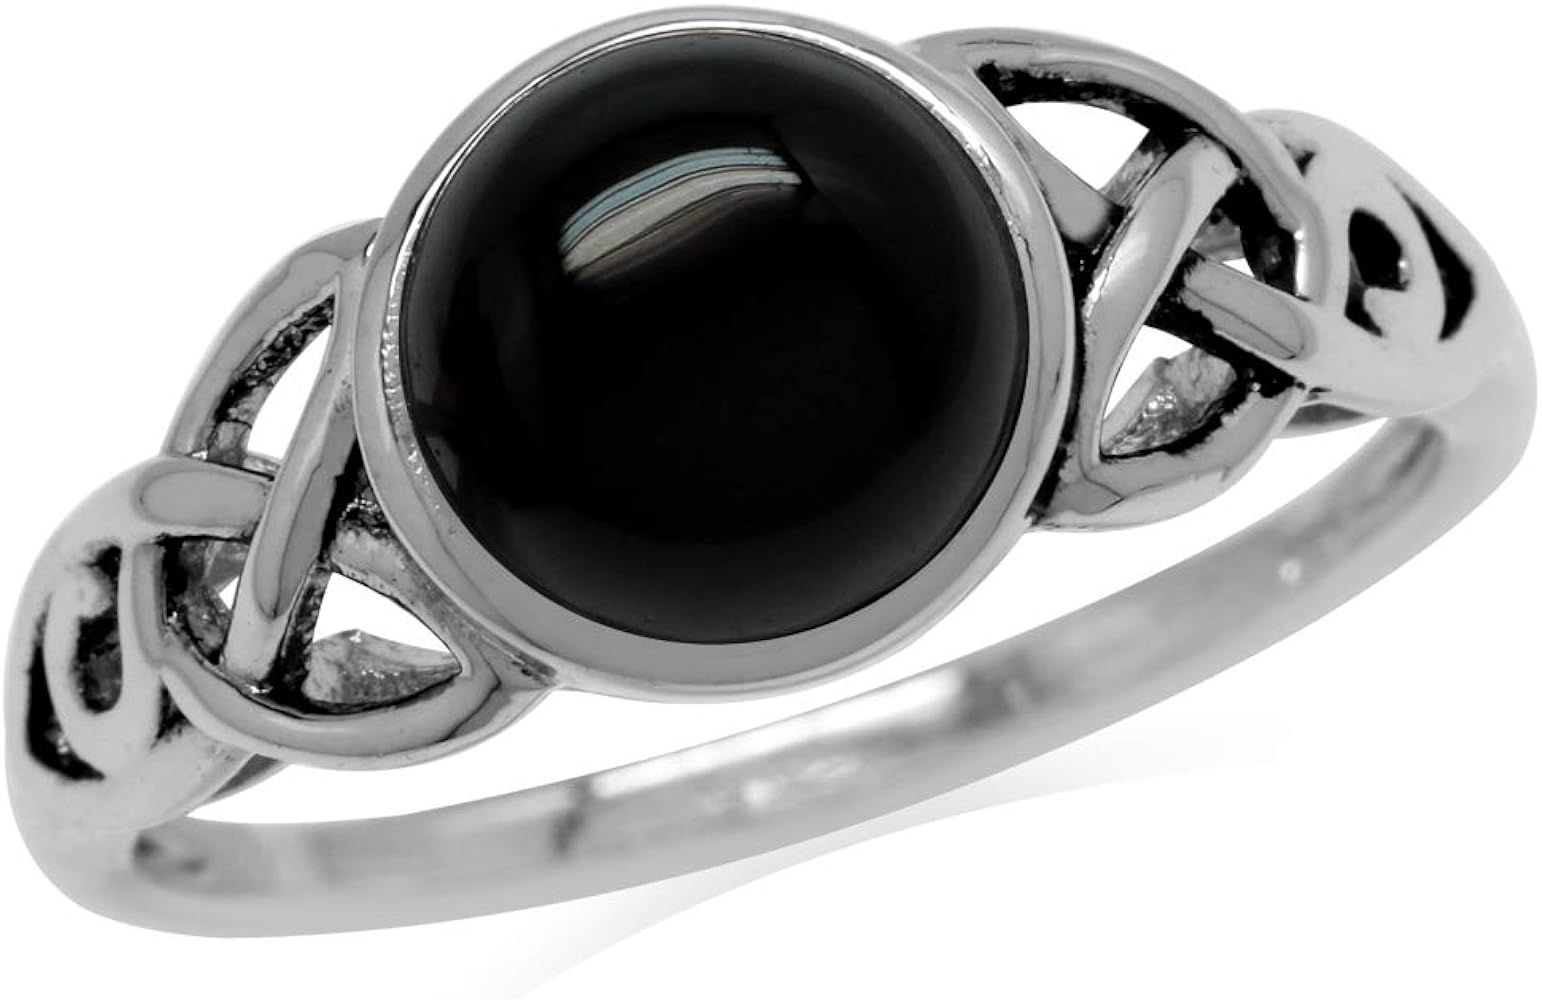 Silvershake 8mm Genuine Round Shape Black Onyx 925 Sterling Silver Triquetra Celtic Knot Solitaire R | Amazon (US)